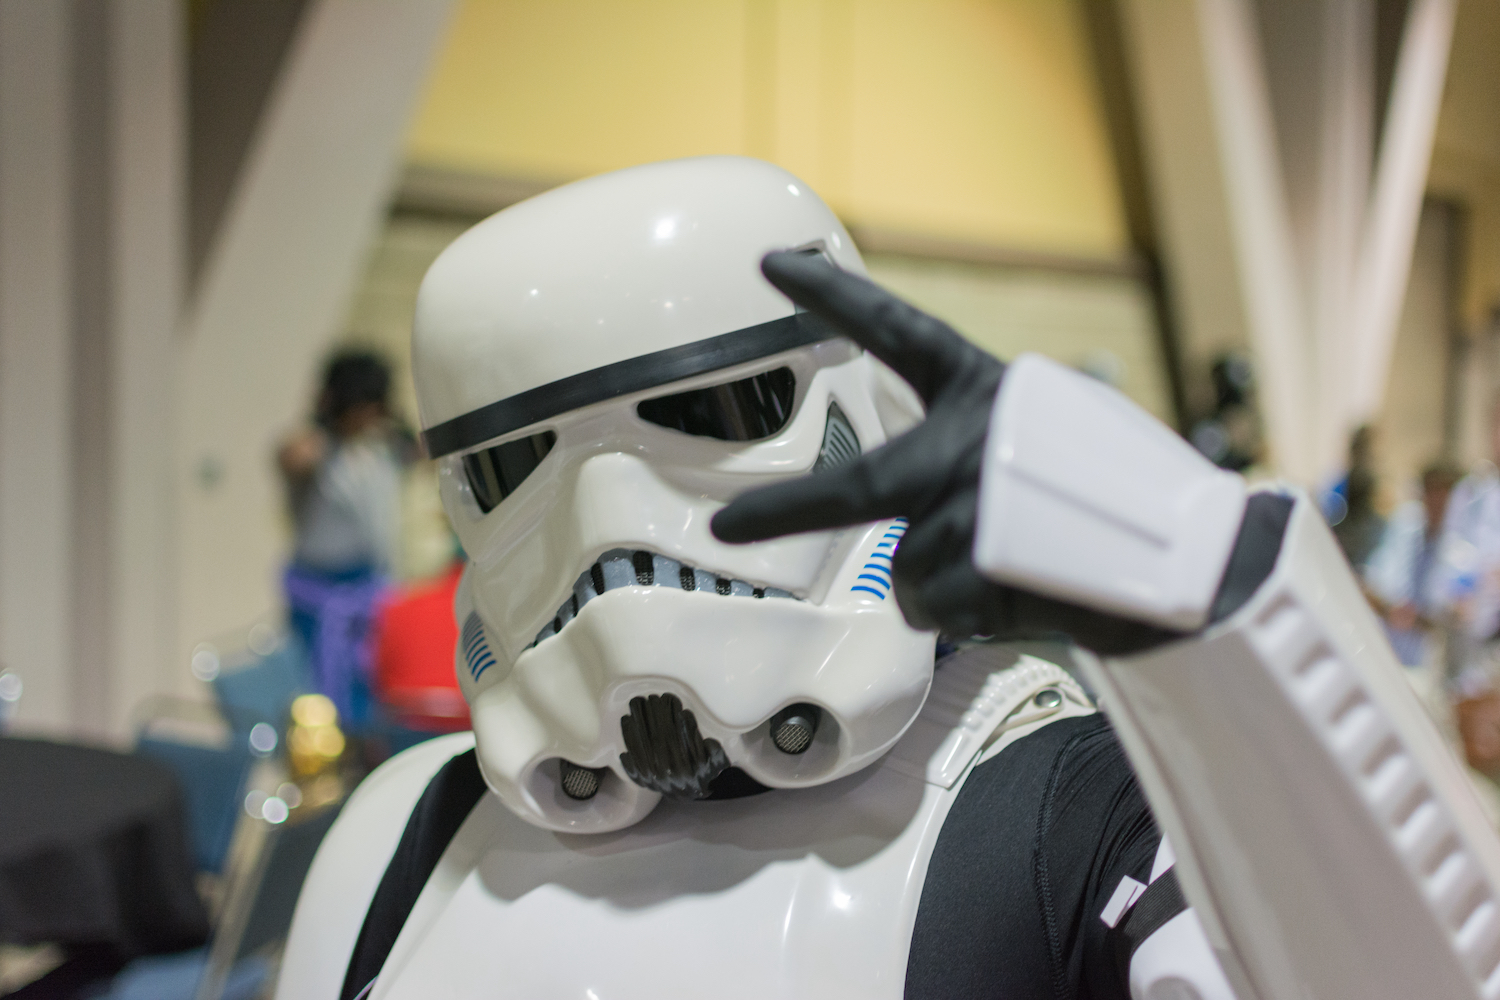 WELLNESS WEDNESDAY #47: May the Fourth Be With Your Mental Health